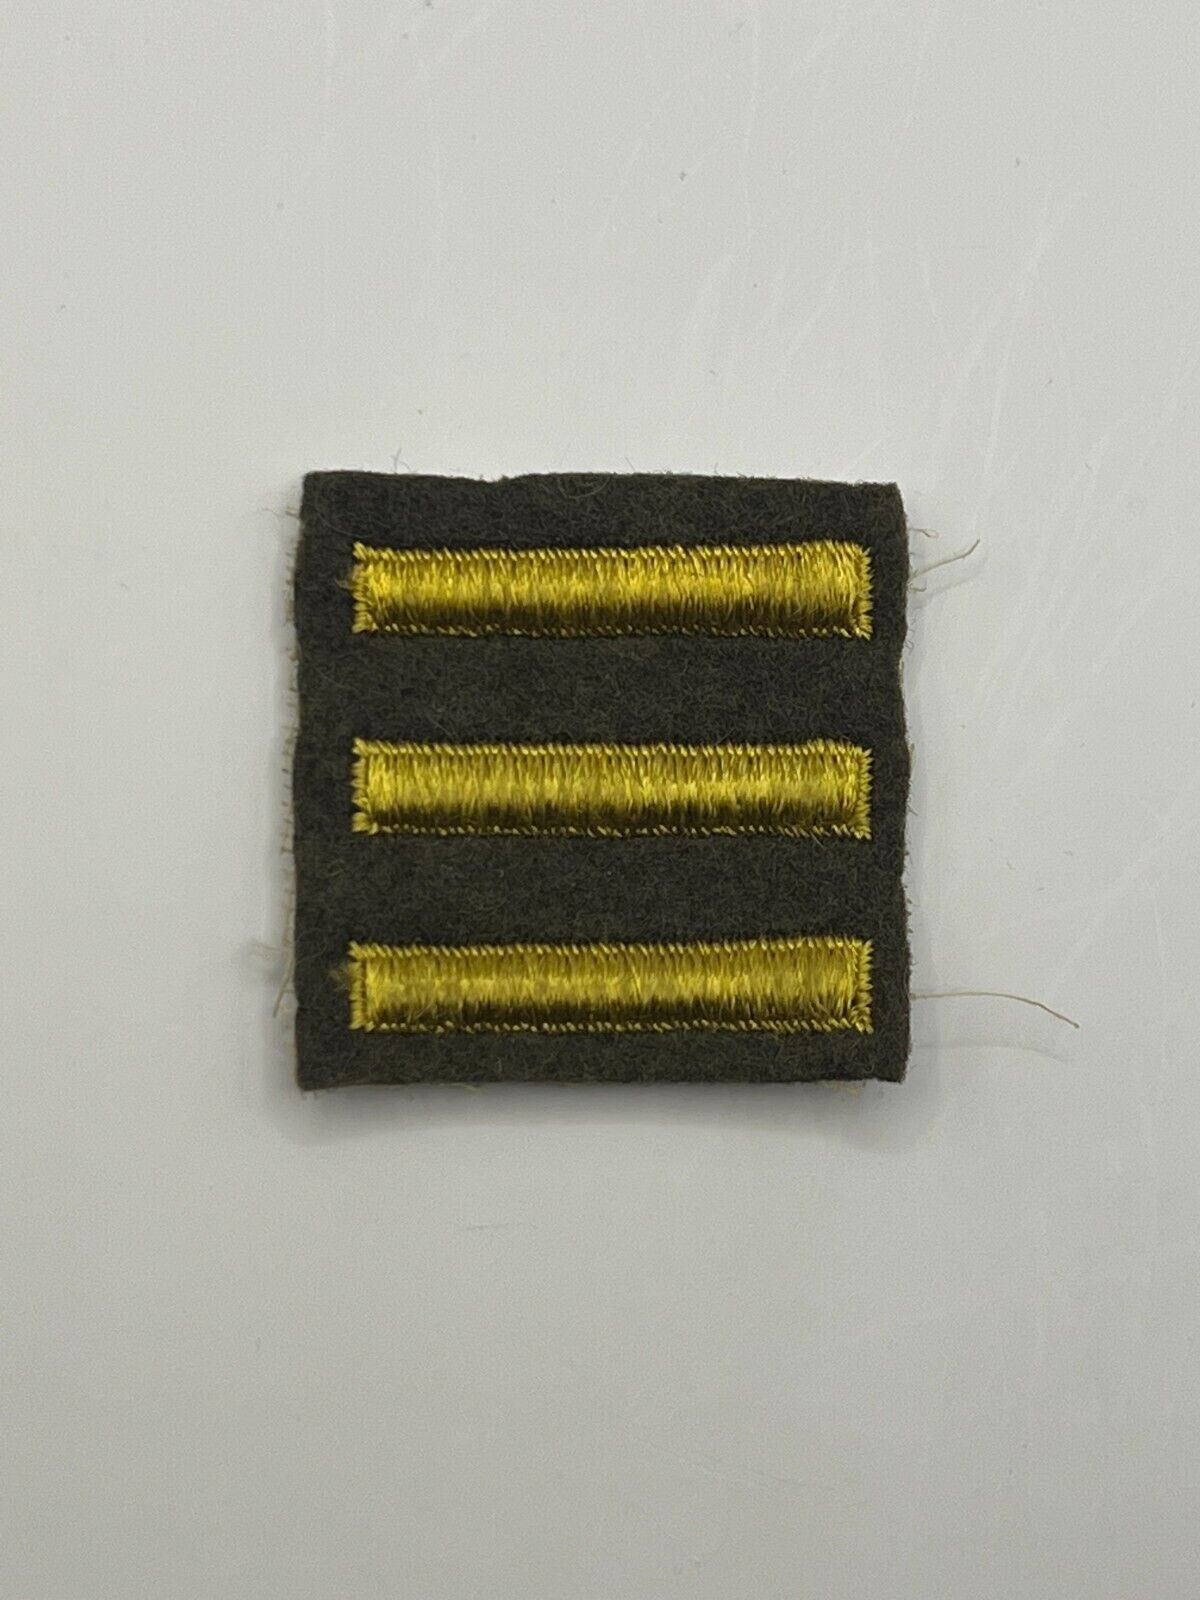 WW2 US Army Overseas Service Bars Embroidered Patch 3 Gold Bars